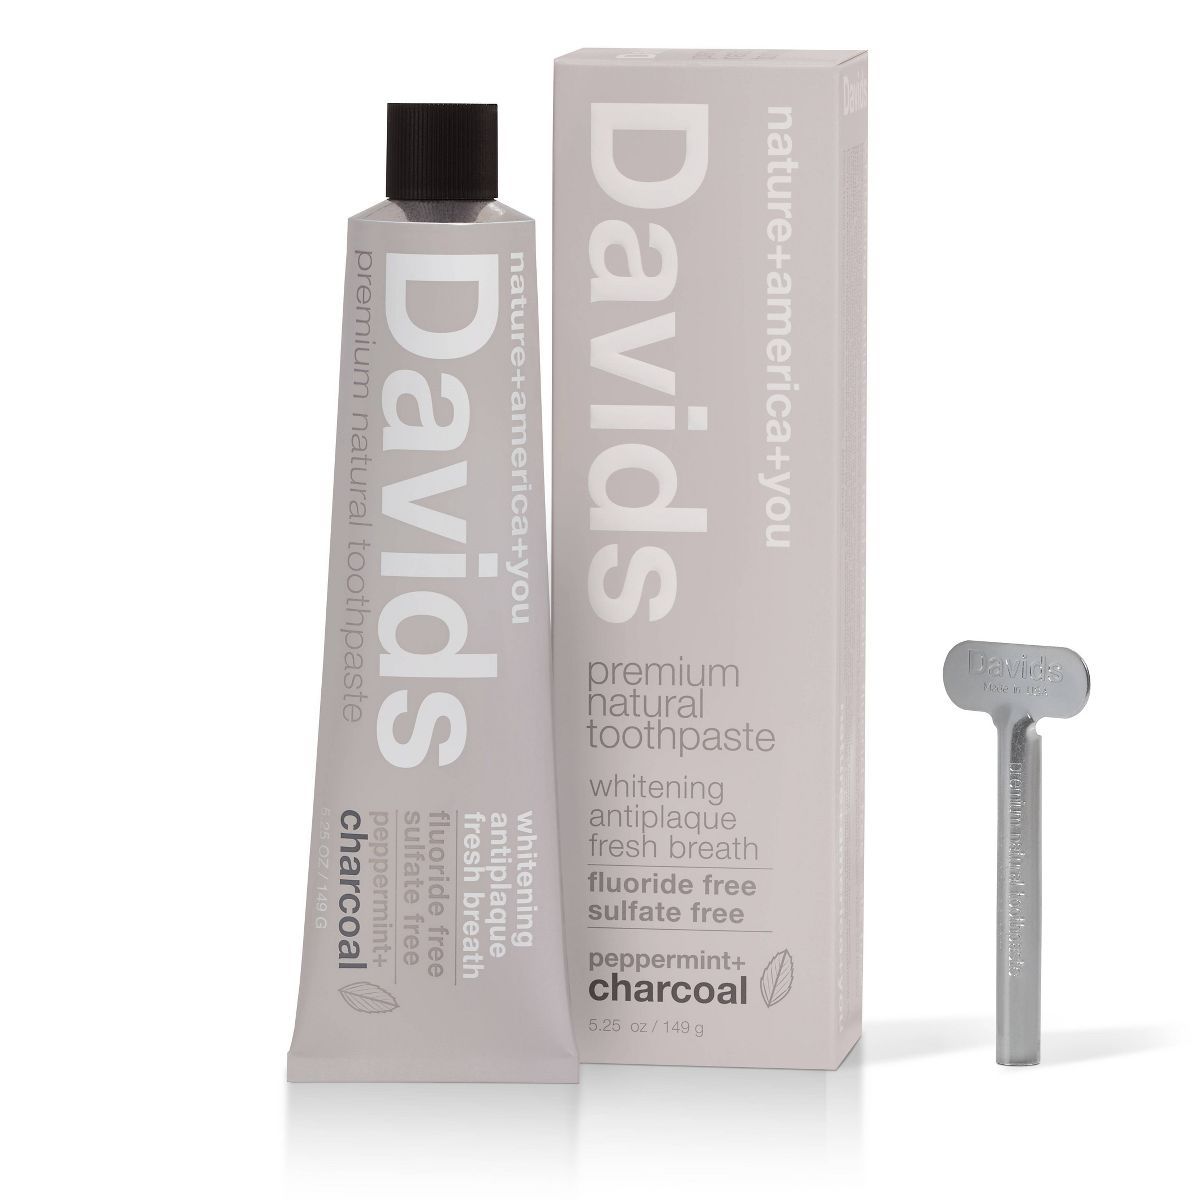 Davids Antiplaque & Whitening Premium Natural Toothpaste Fluoride Free Charcoal - Peppermint - 5.... | Target